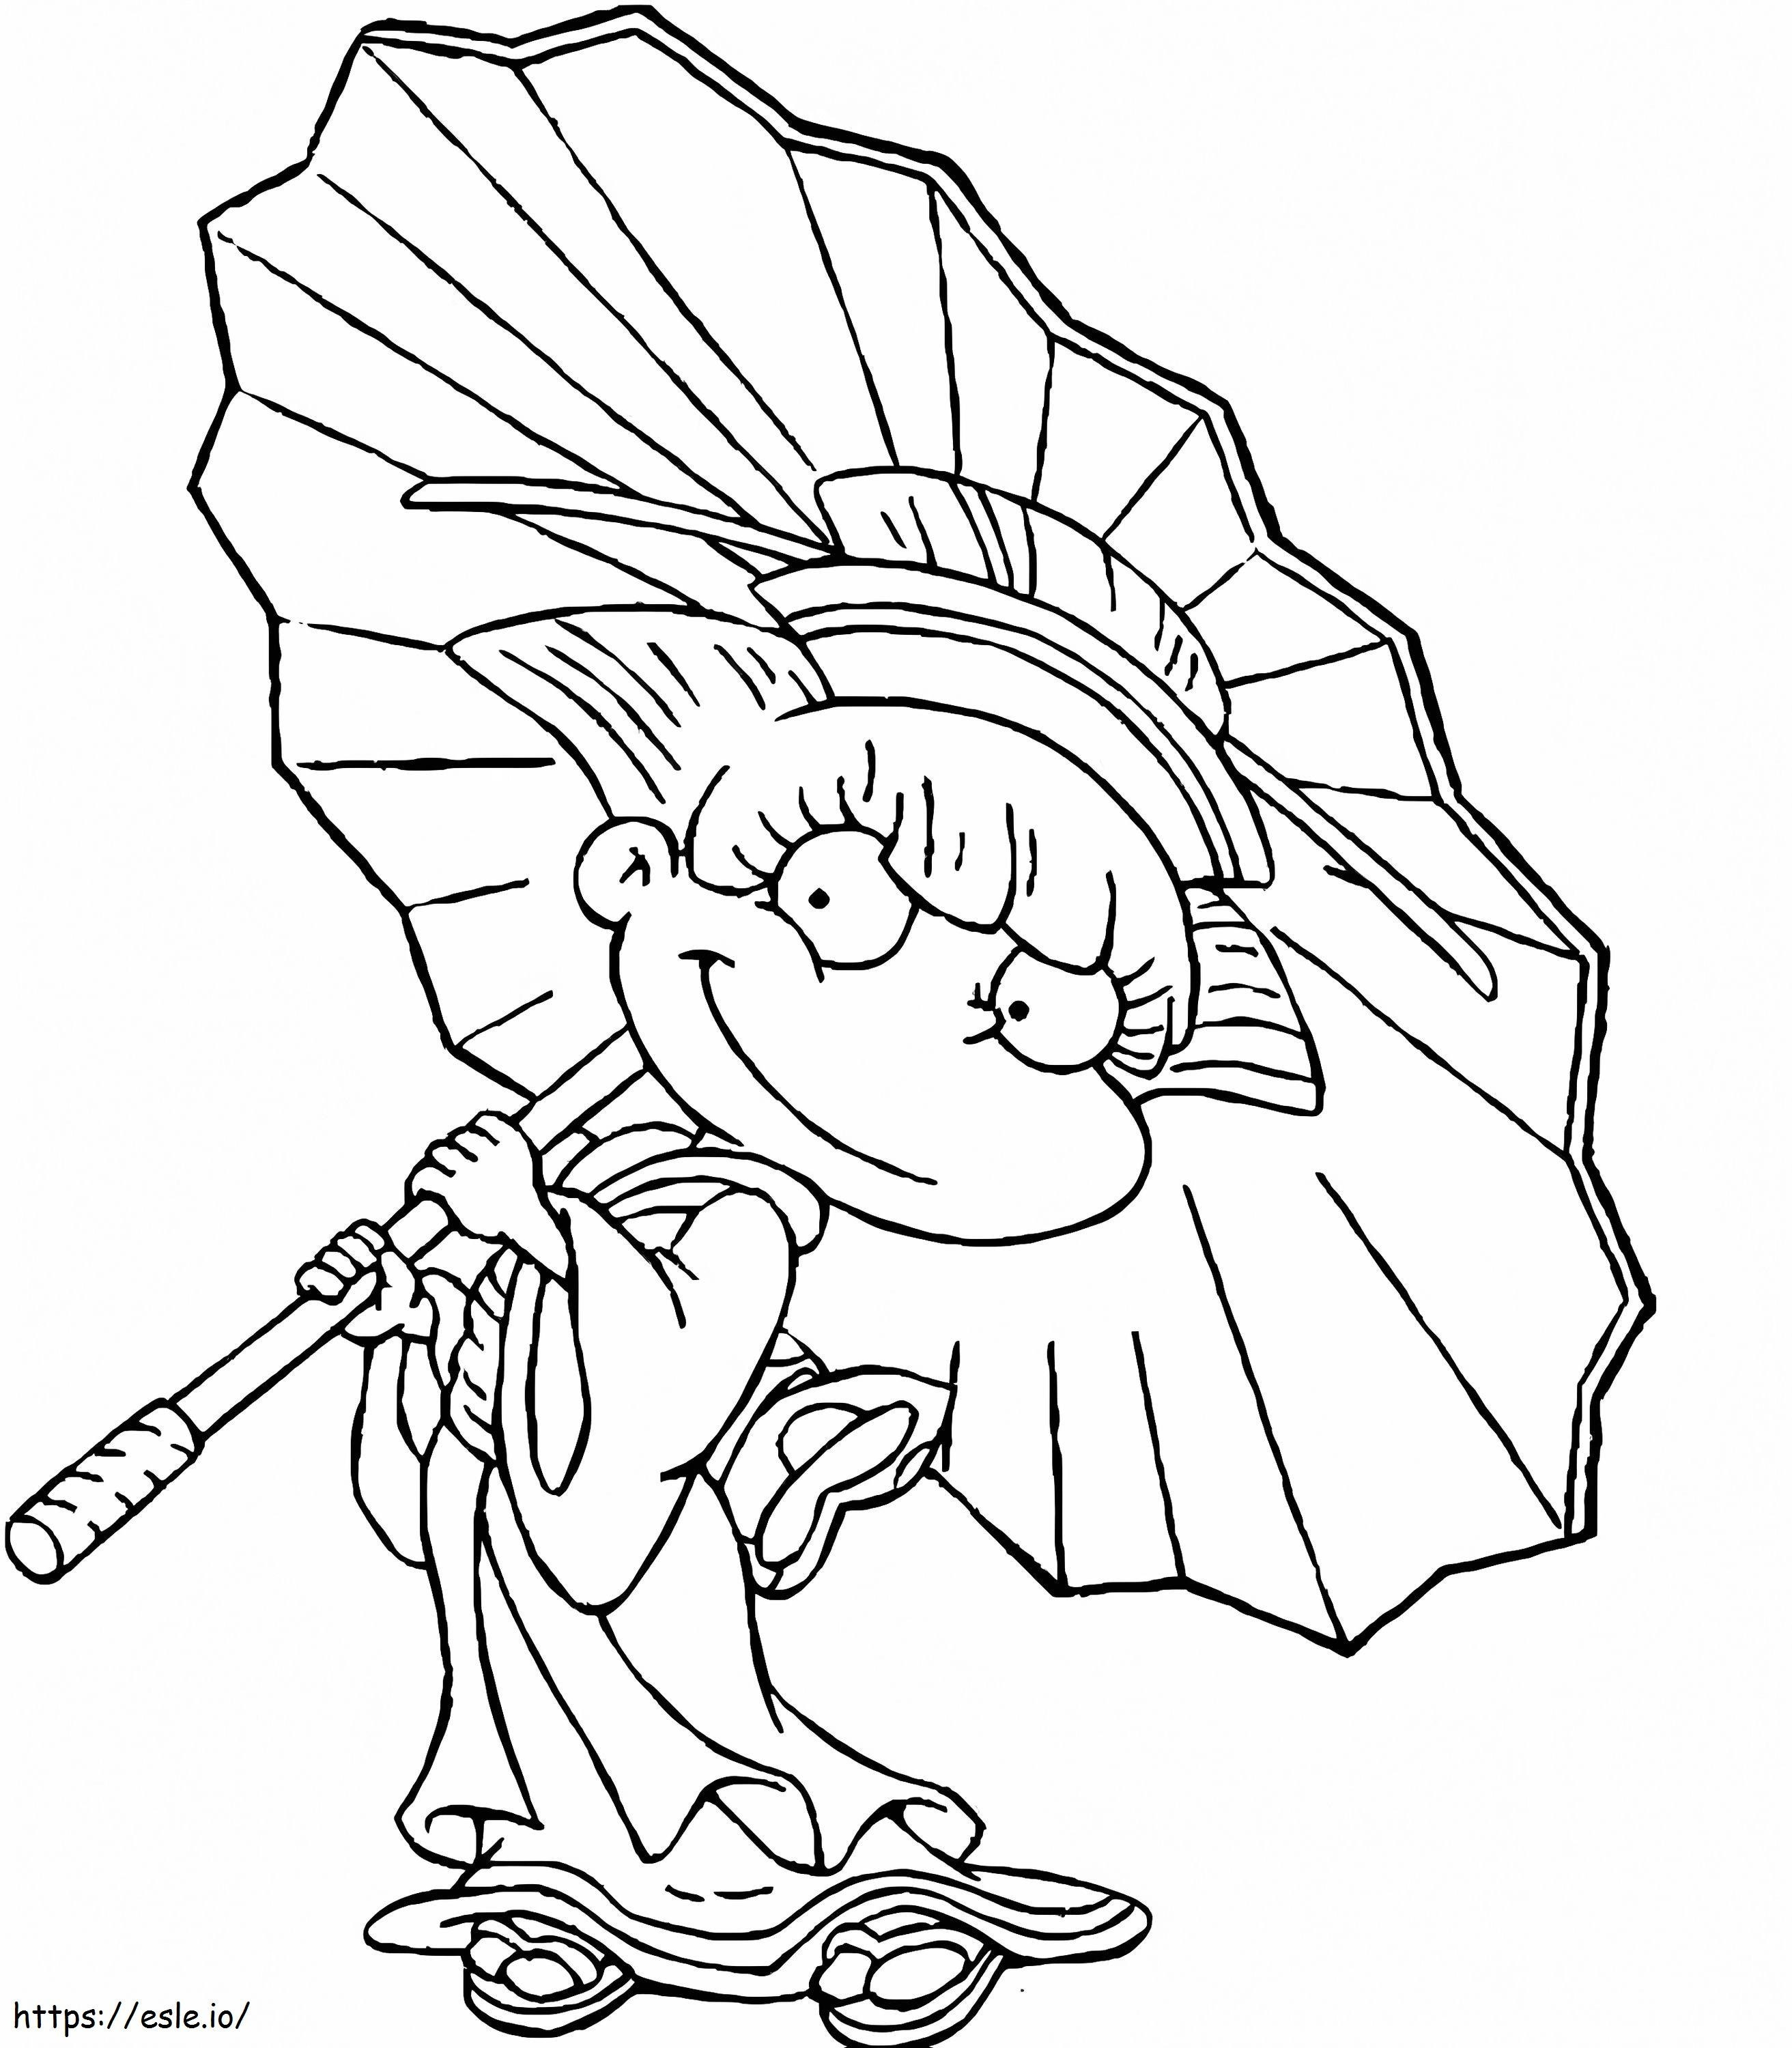 Angelica Pickles From Rugrats coloring page